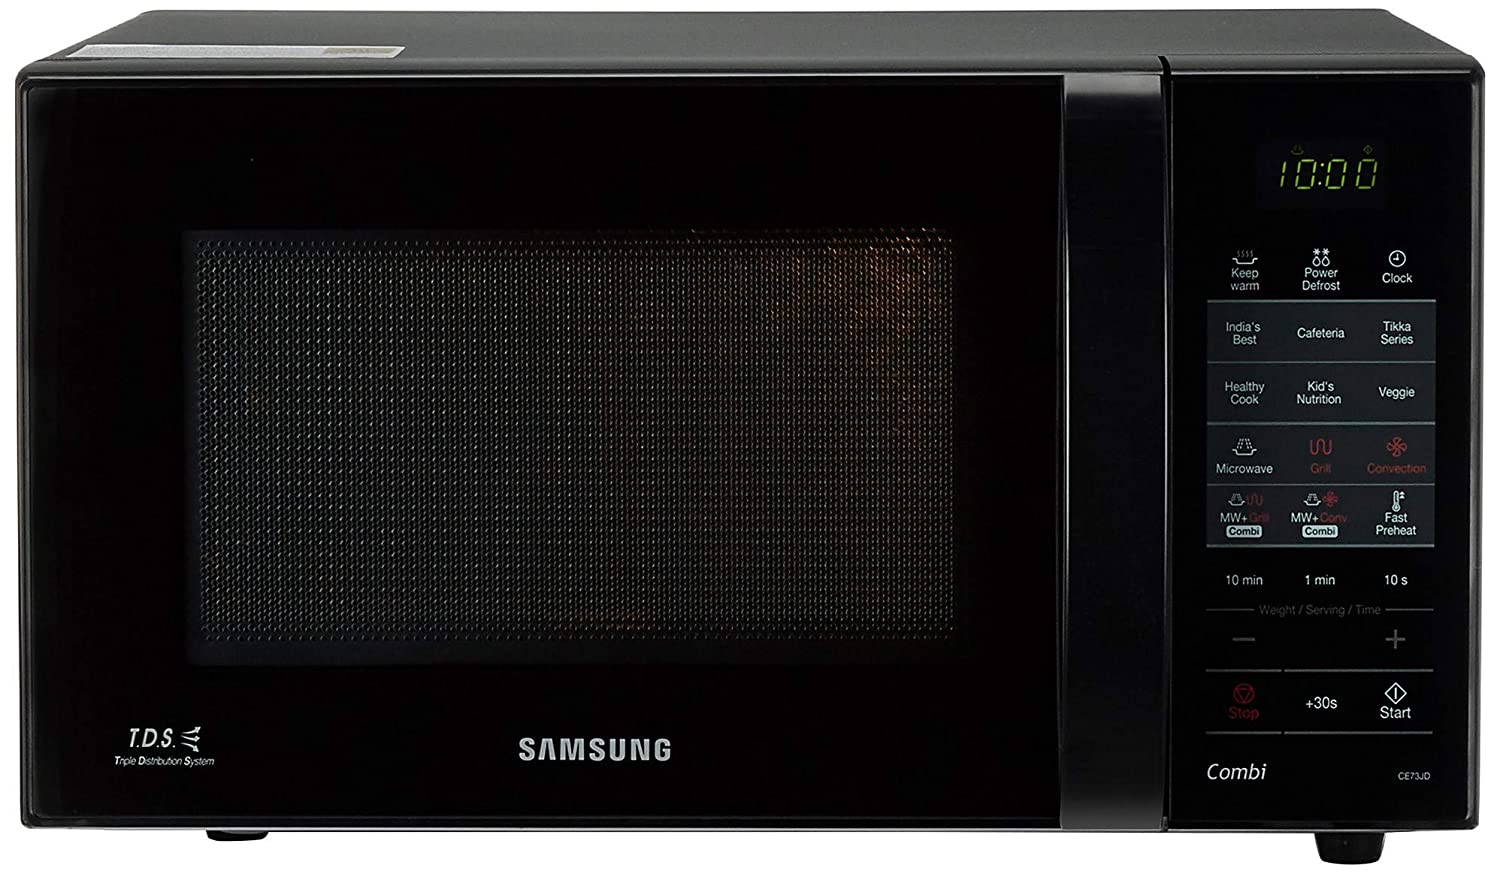 Samsung 21 L Convection Microwave Oven (CE73JD-B/XTL) Offers And Deals